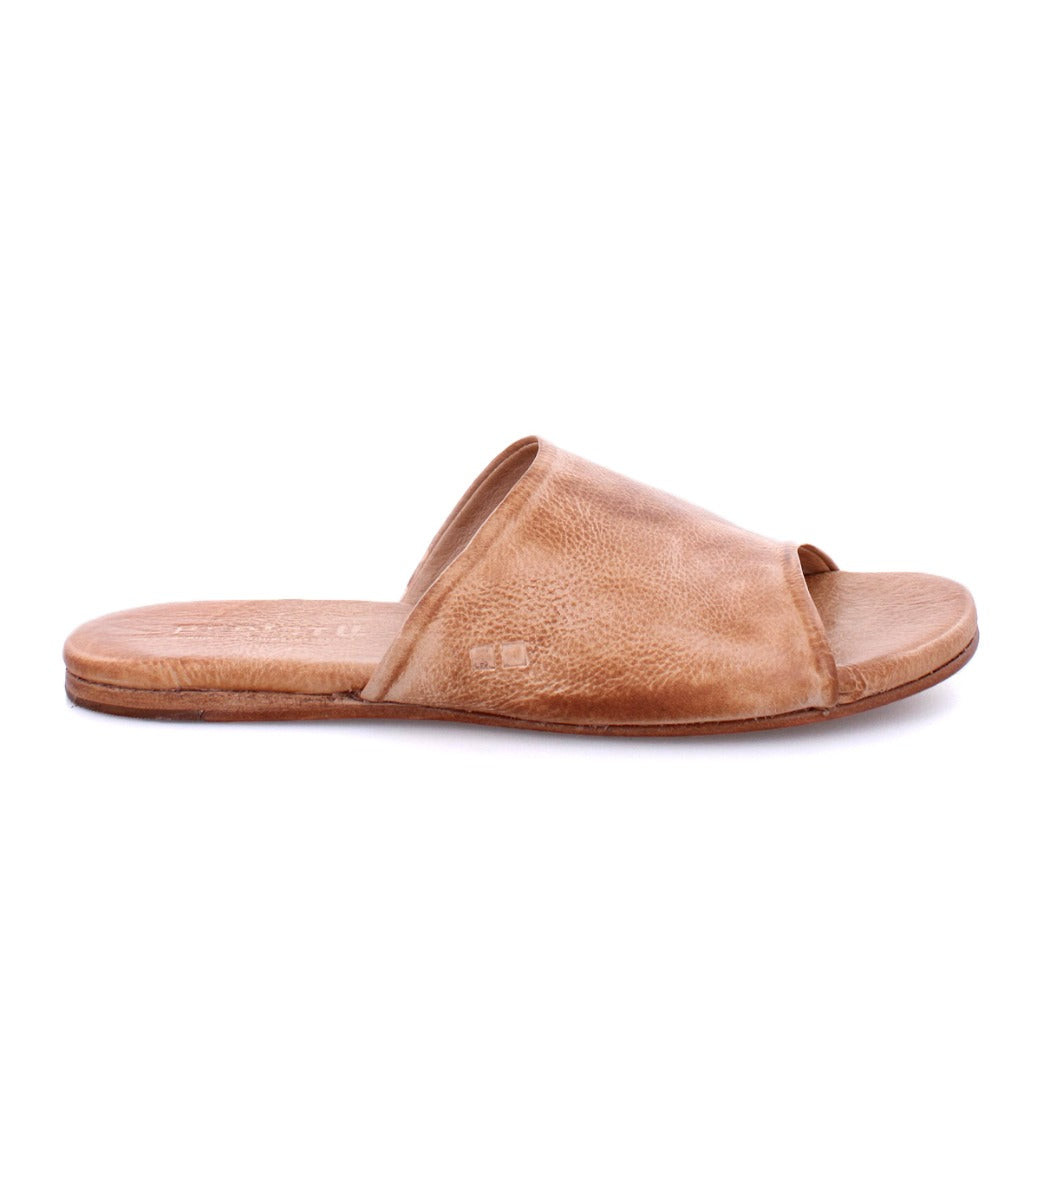 The Gia women's tan leather slide on sandals by Bed Stu.